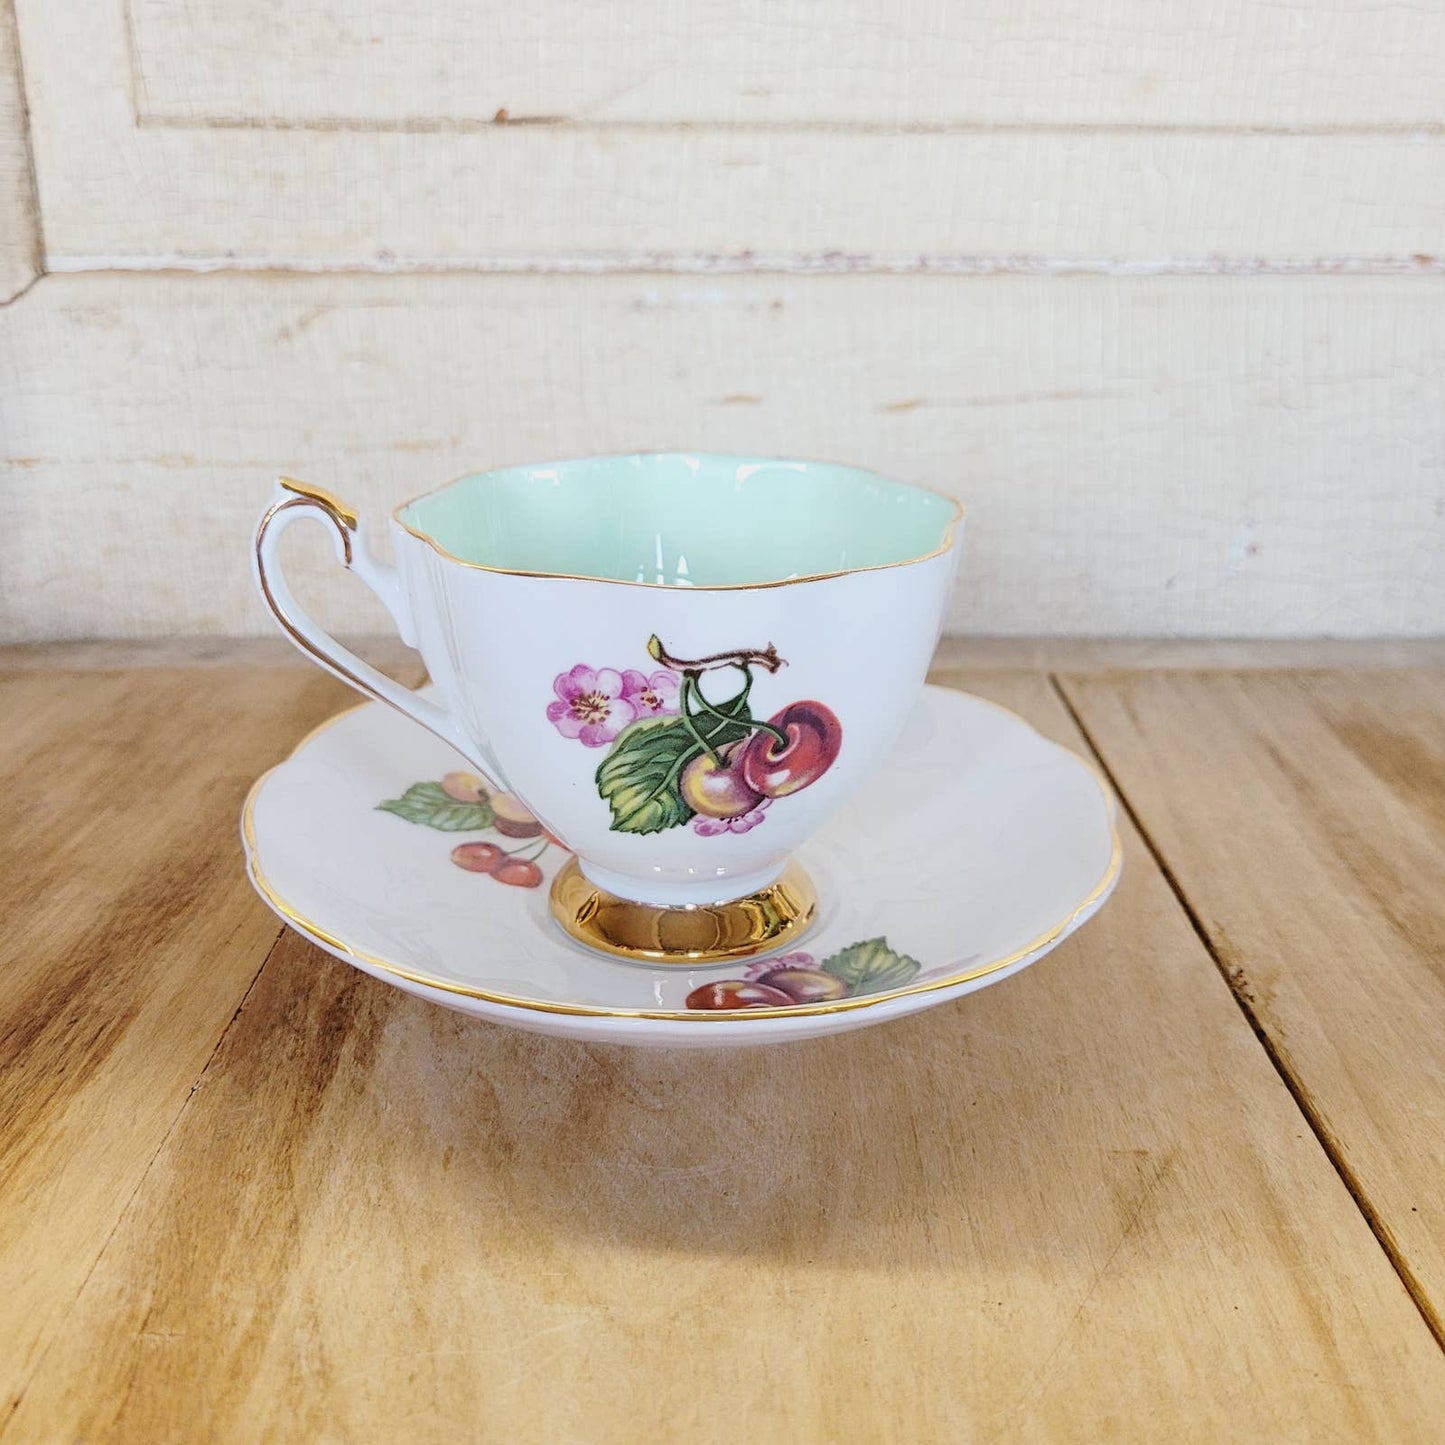 Vintage Queen Anne Bone China Teacup And Saucer Cherries